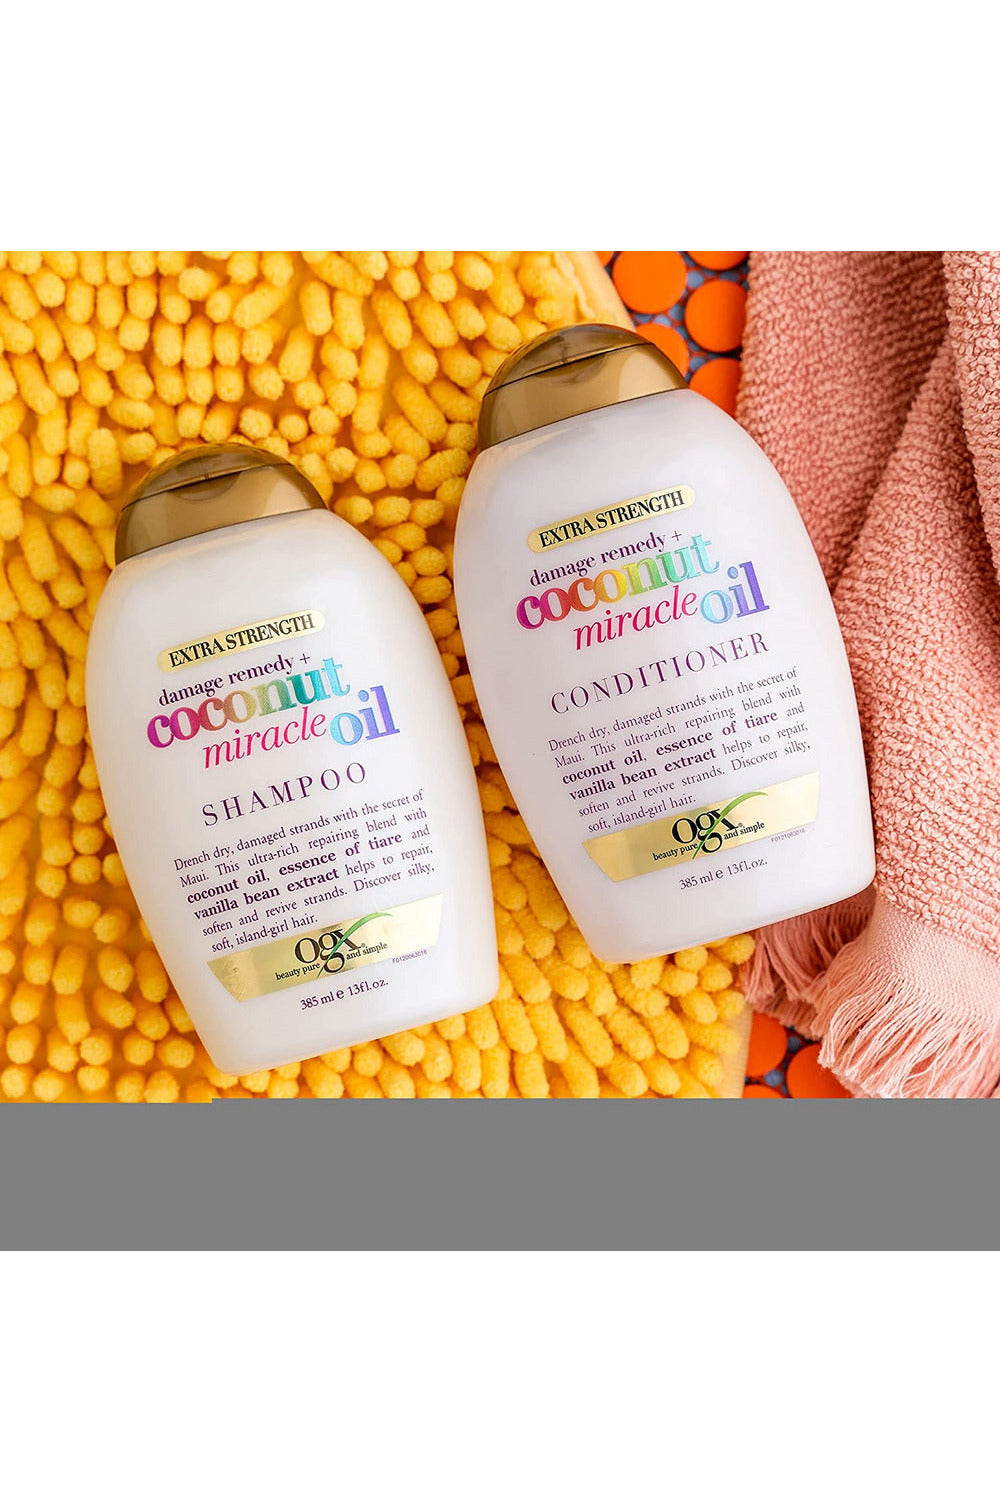 Buy OGX Conditioner Damage Remedy + Coconut Miracle Oil - 385ml in Pakistan